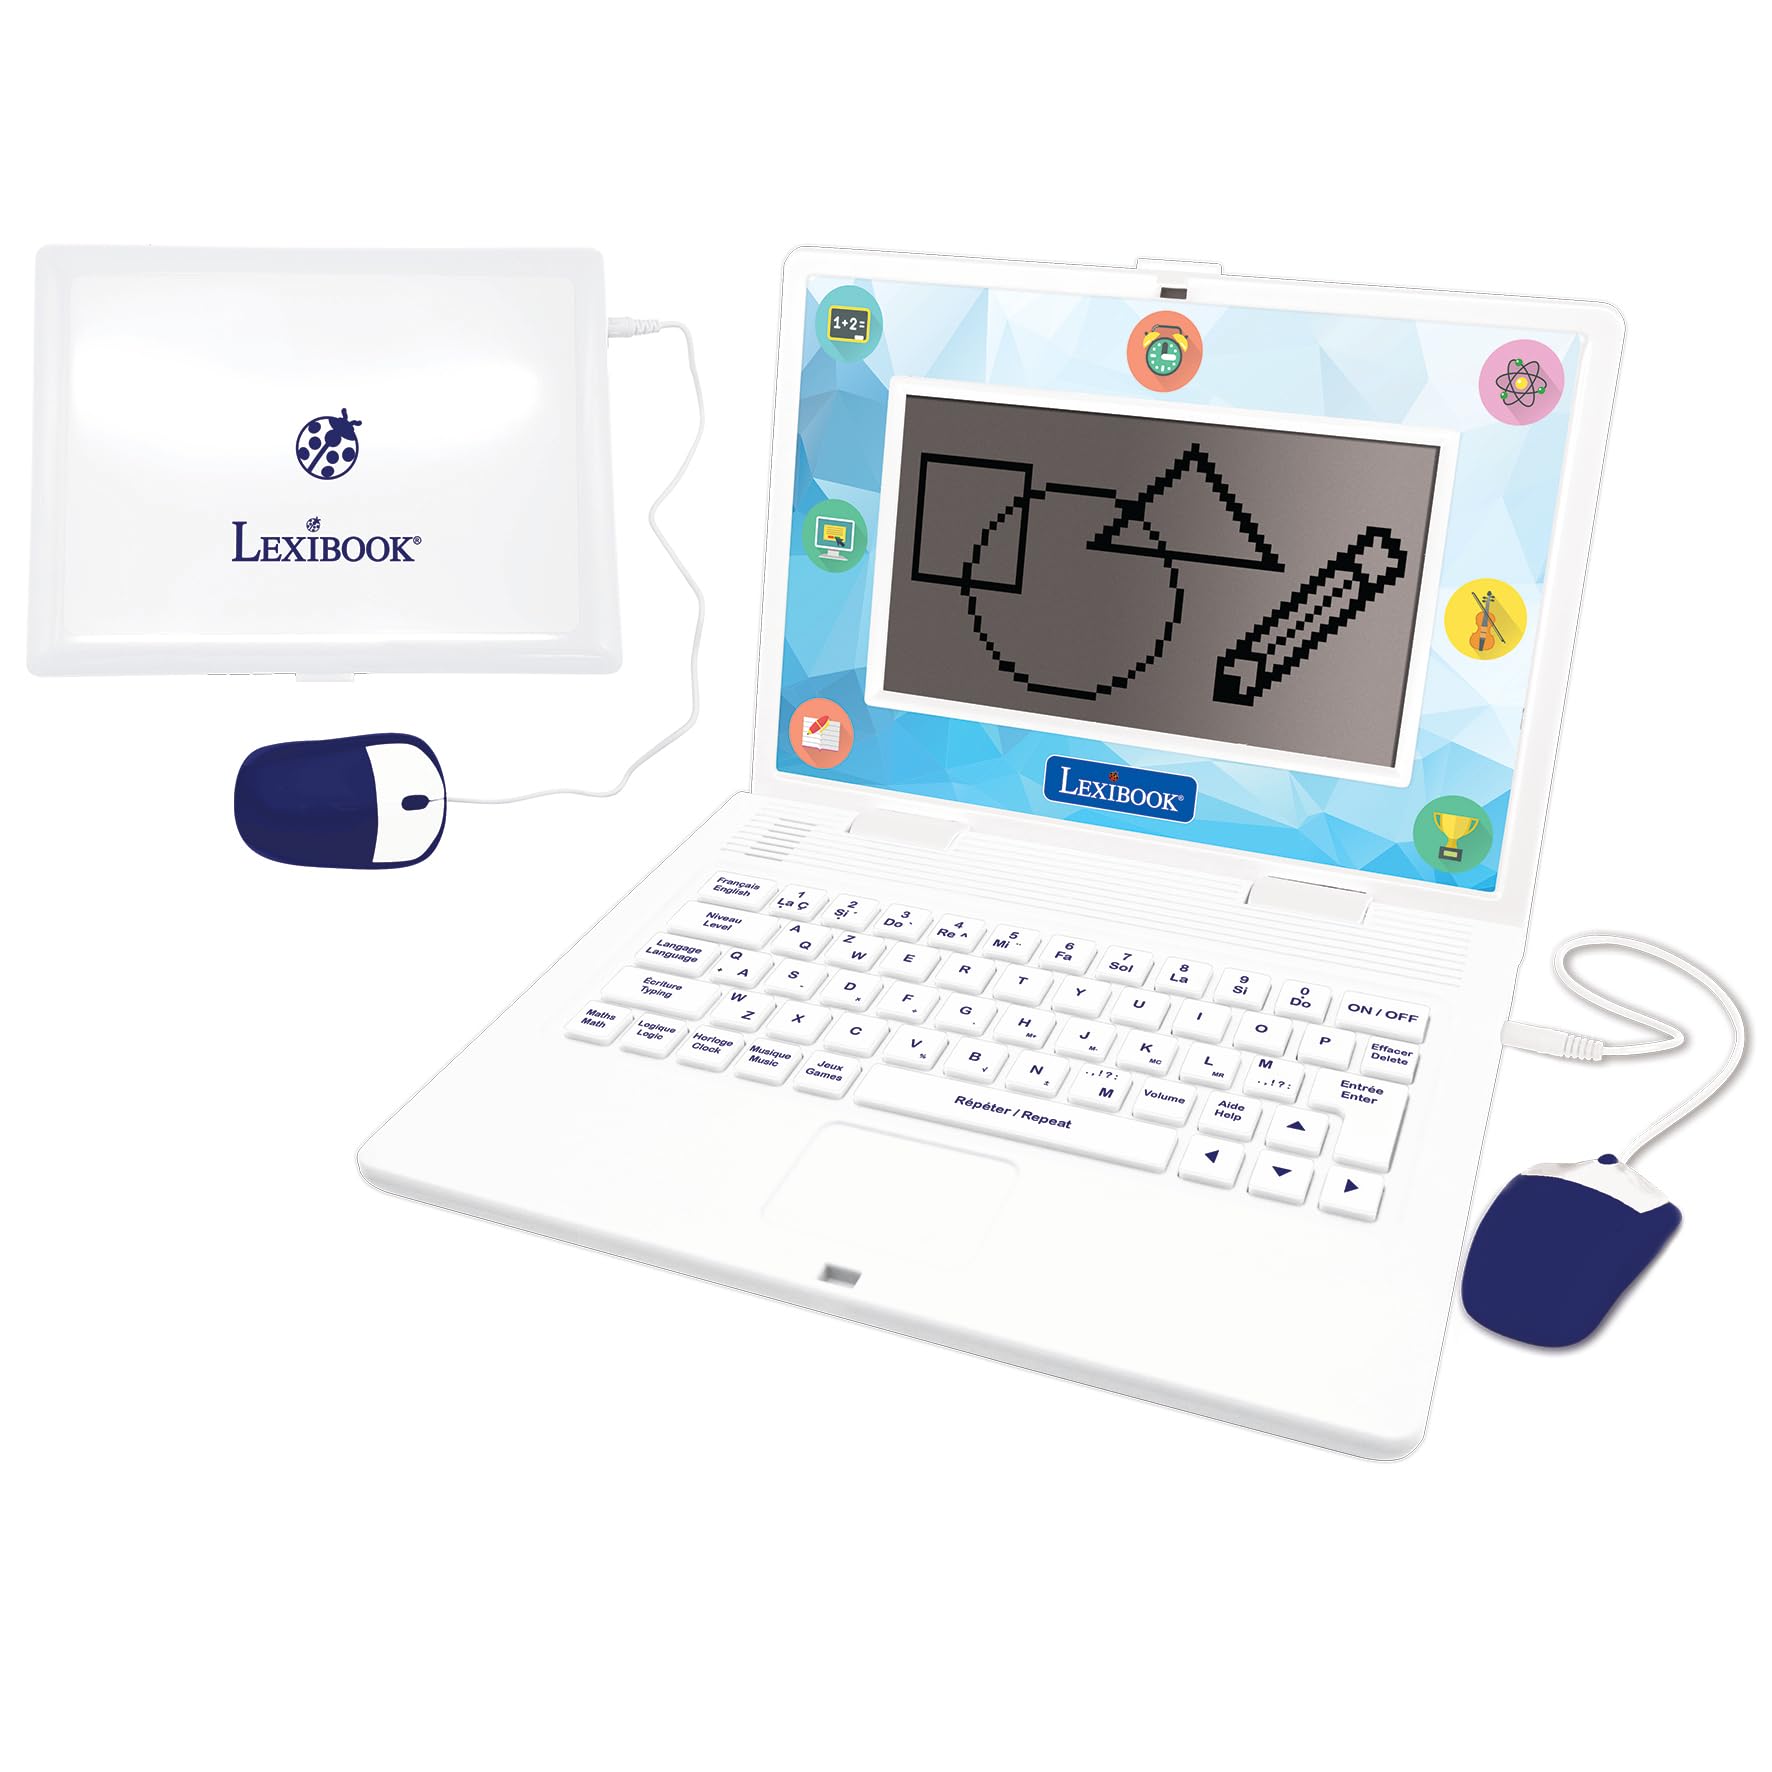 Lexibook - Bilingual and Educational Laptop English/Spanish - Toy for Children, 170 Activities to Learn Languages, Mathematics, Logic, Clock Reading, Play Games and Music, Large Screen - JC599i2